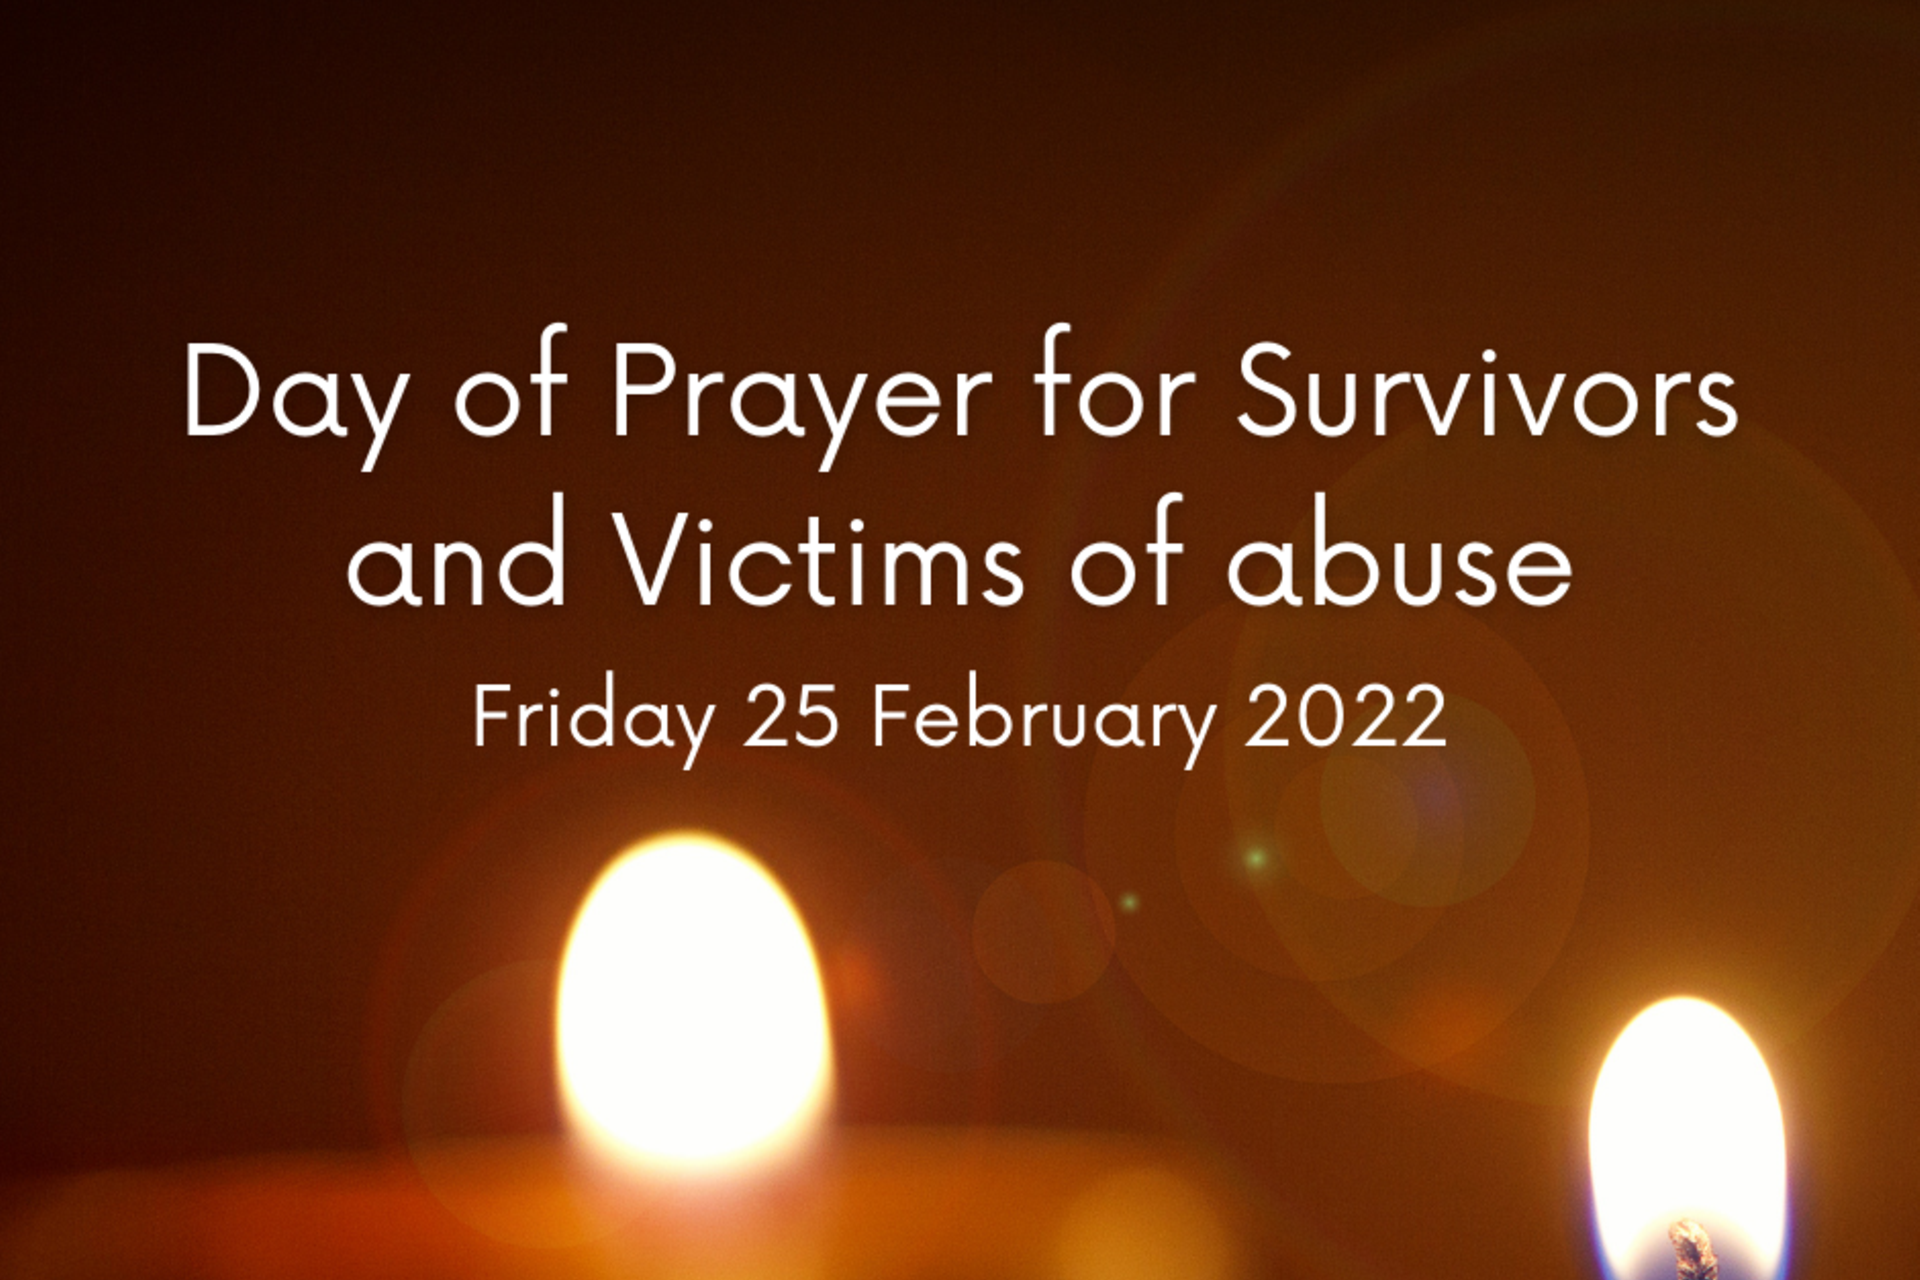 Day of Prayer for Survivors and Victims of Abuse 2022